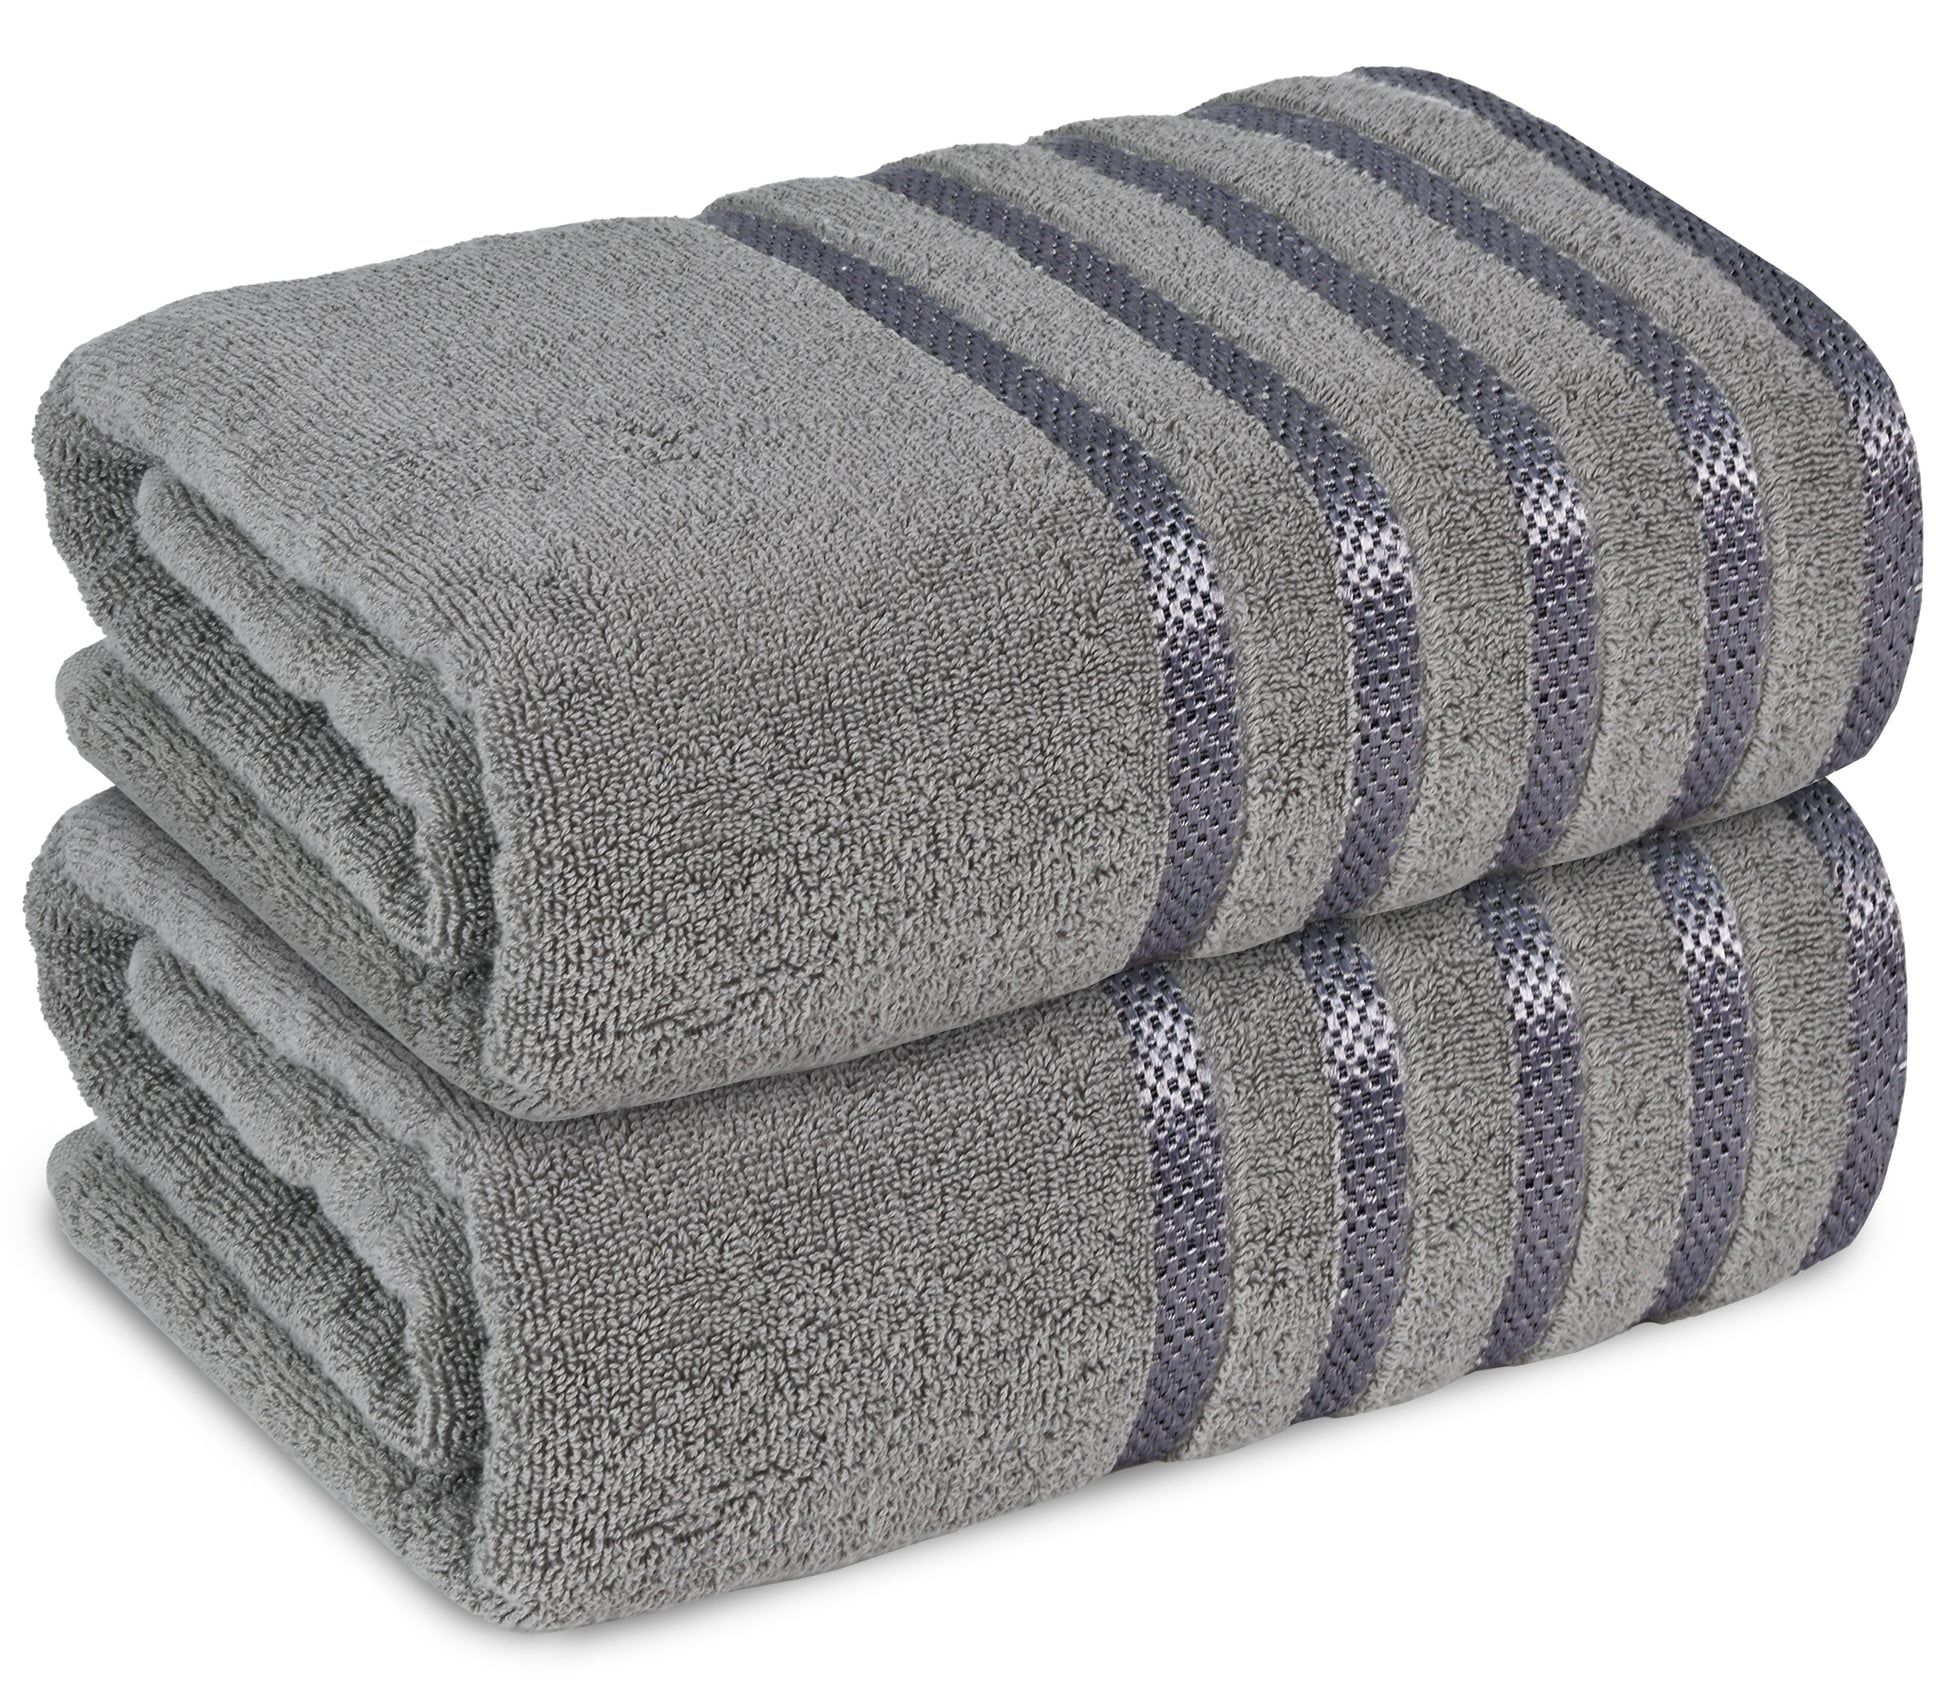 2 Pc ultrasoft and quick dry viscose bath sheet set | Eco-friendly and skin-friendly made of 100% Cotton | 2 bath sheets 90x180cm / 35x70inch-Towel Set-Weave Essentials-2x Jumbo Bath Sheet-Charcoal Grey-Weave Essentials